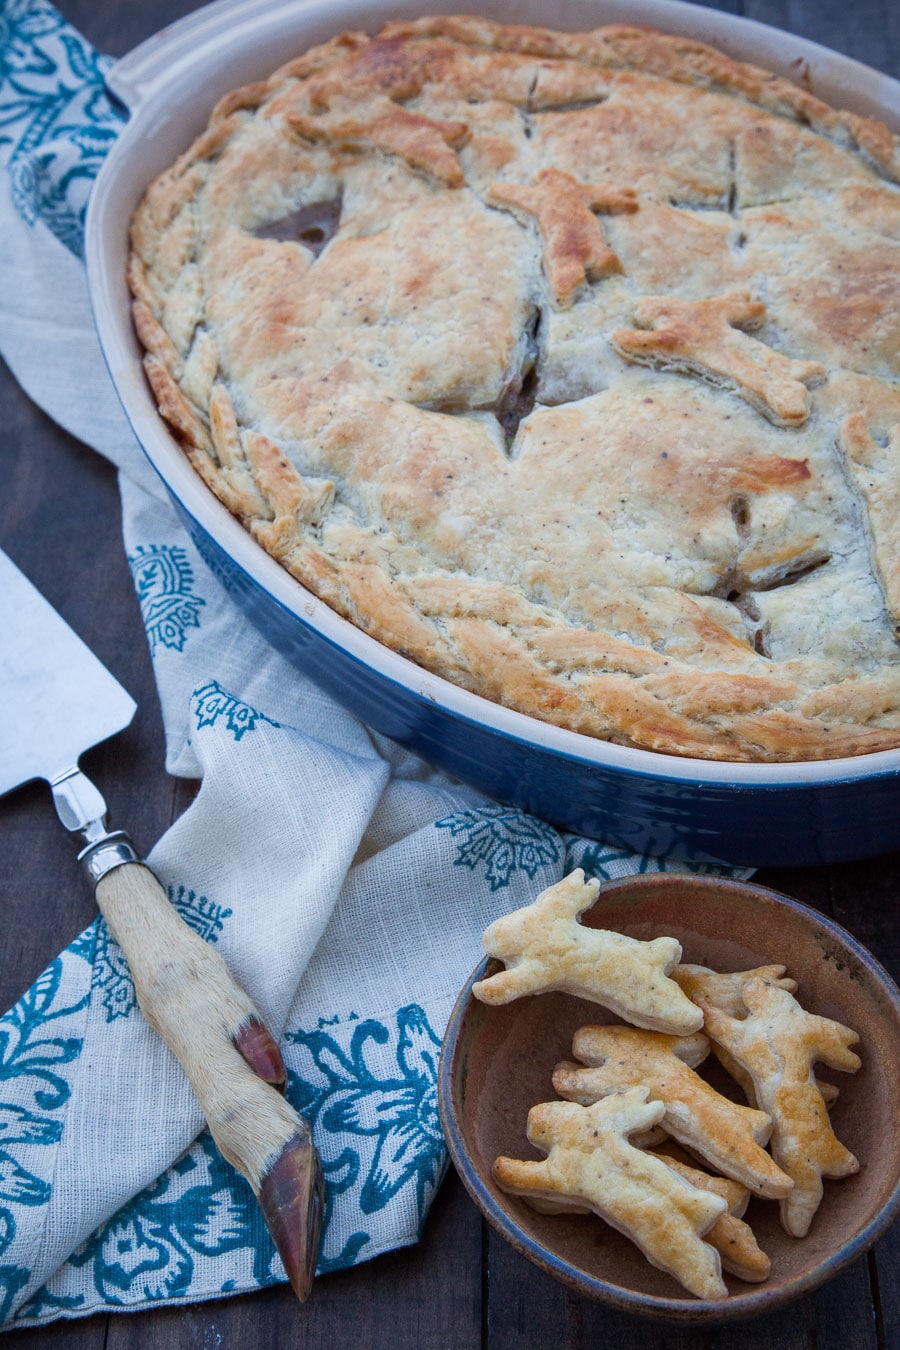 Rabbit Pot Pie with Wild Mushrooms. Photo and recipe by Irvin Lin of Eat the Love.